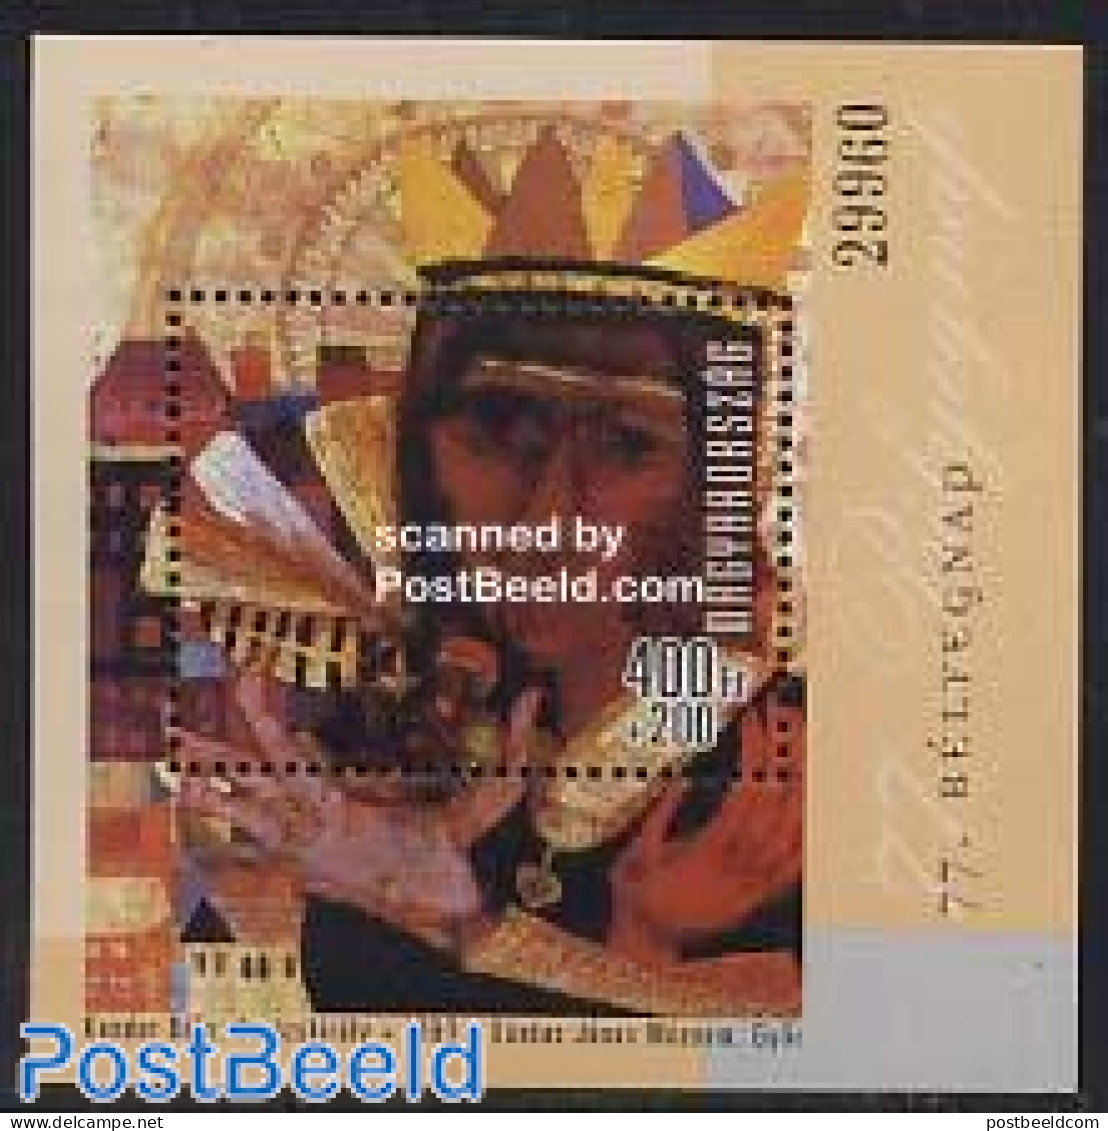 Hungary 2004 Stamp Day S/s, Mint NH, Stamp Day - Art - Modern Art (1850-present) - Neufs